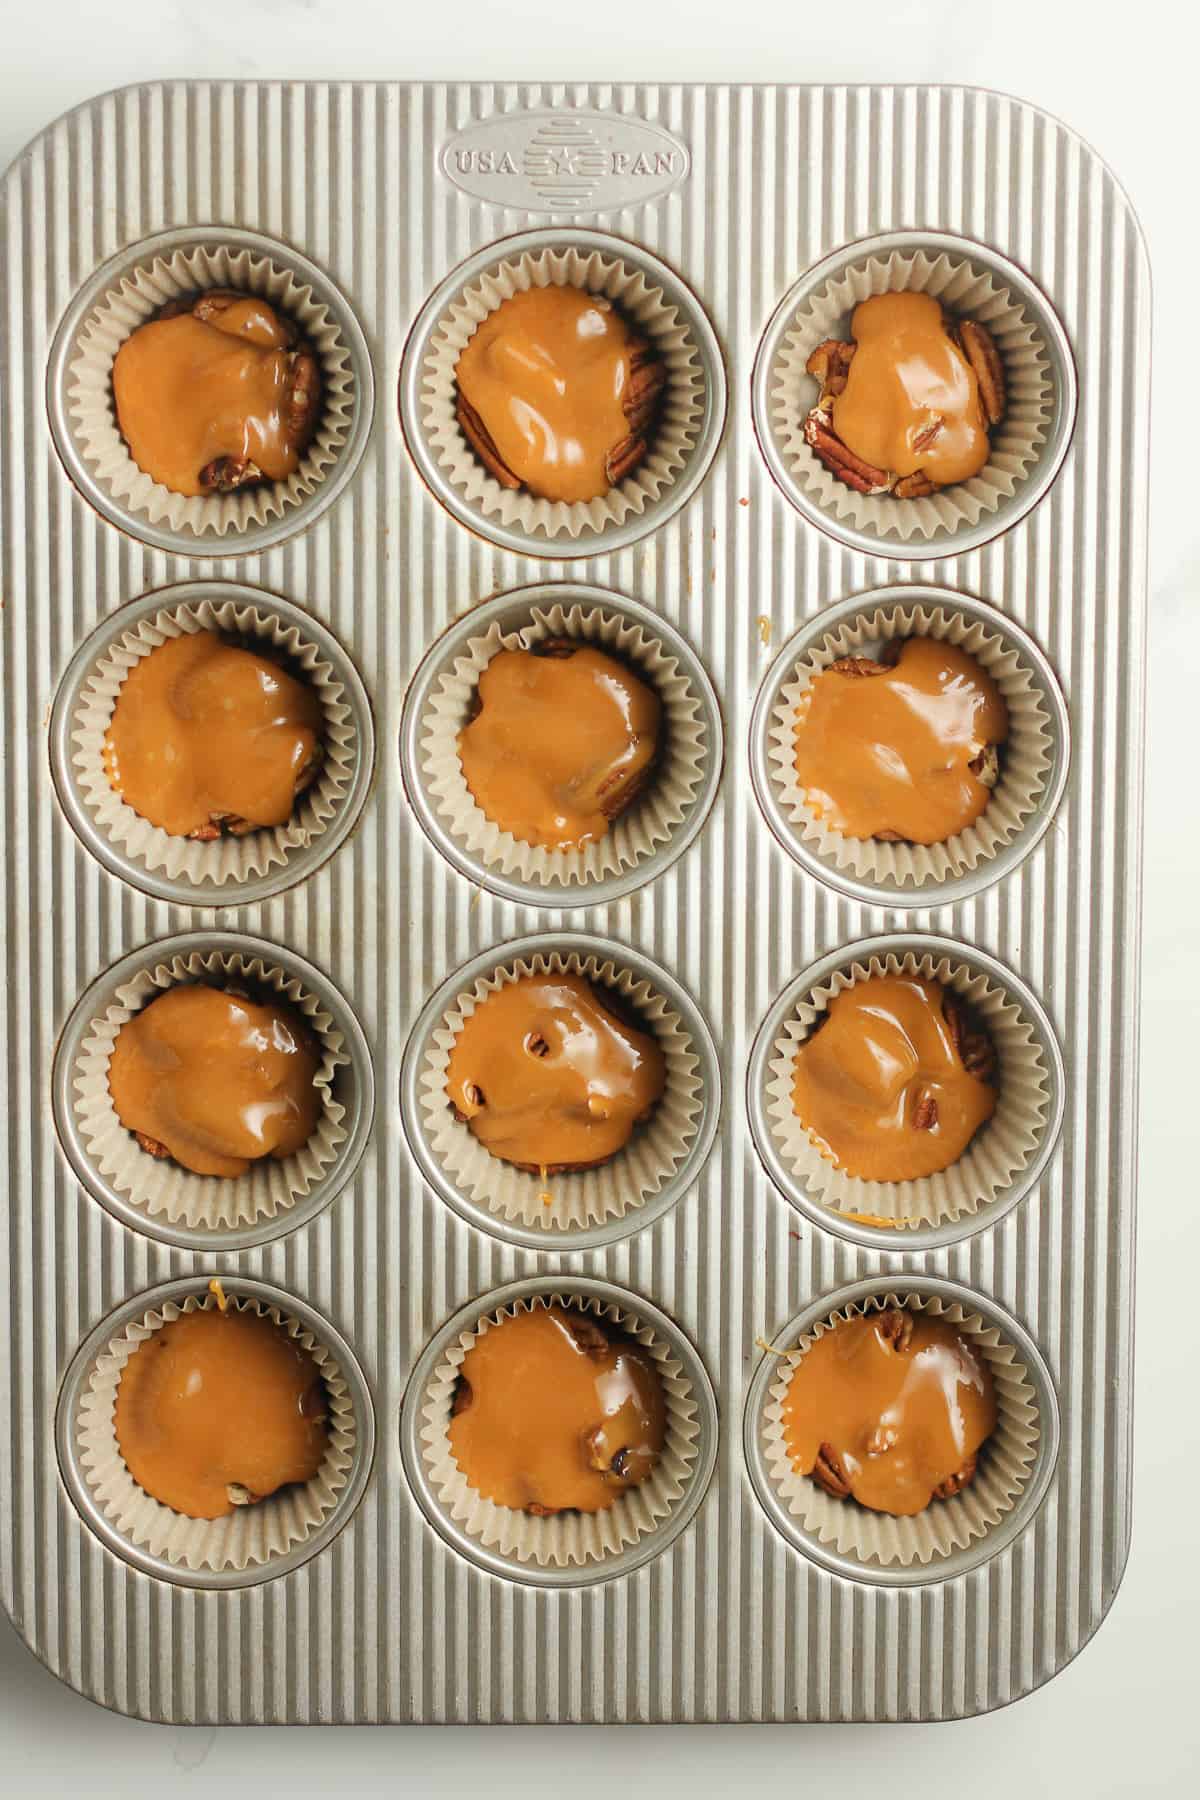 A 12-cup muffin tin with caramel on top of pecans in parchment cups.